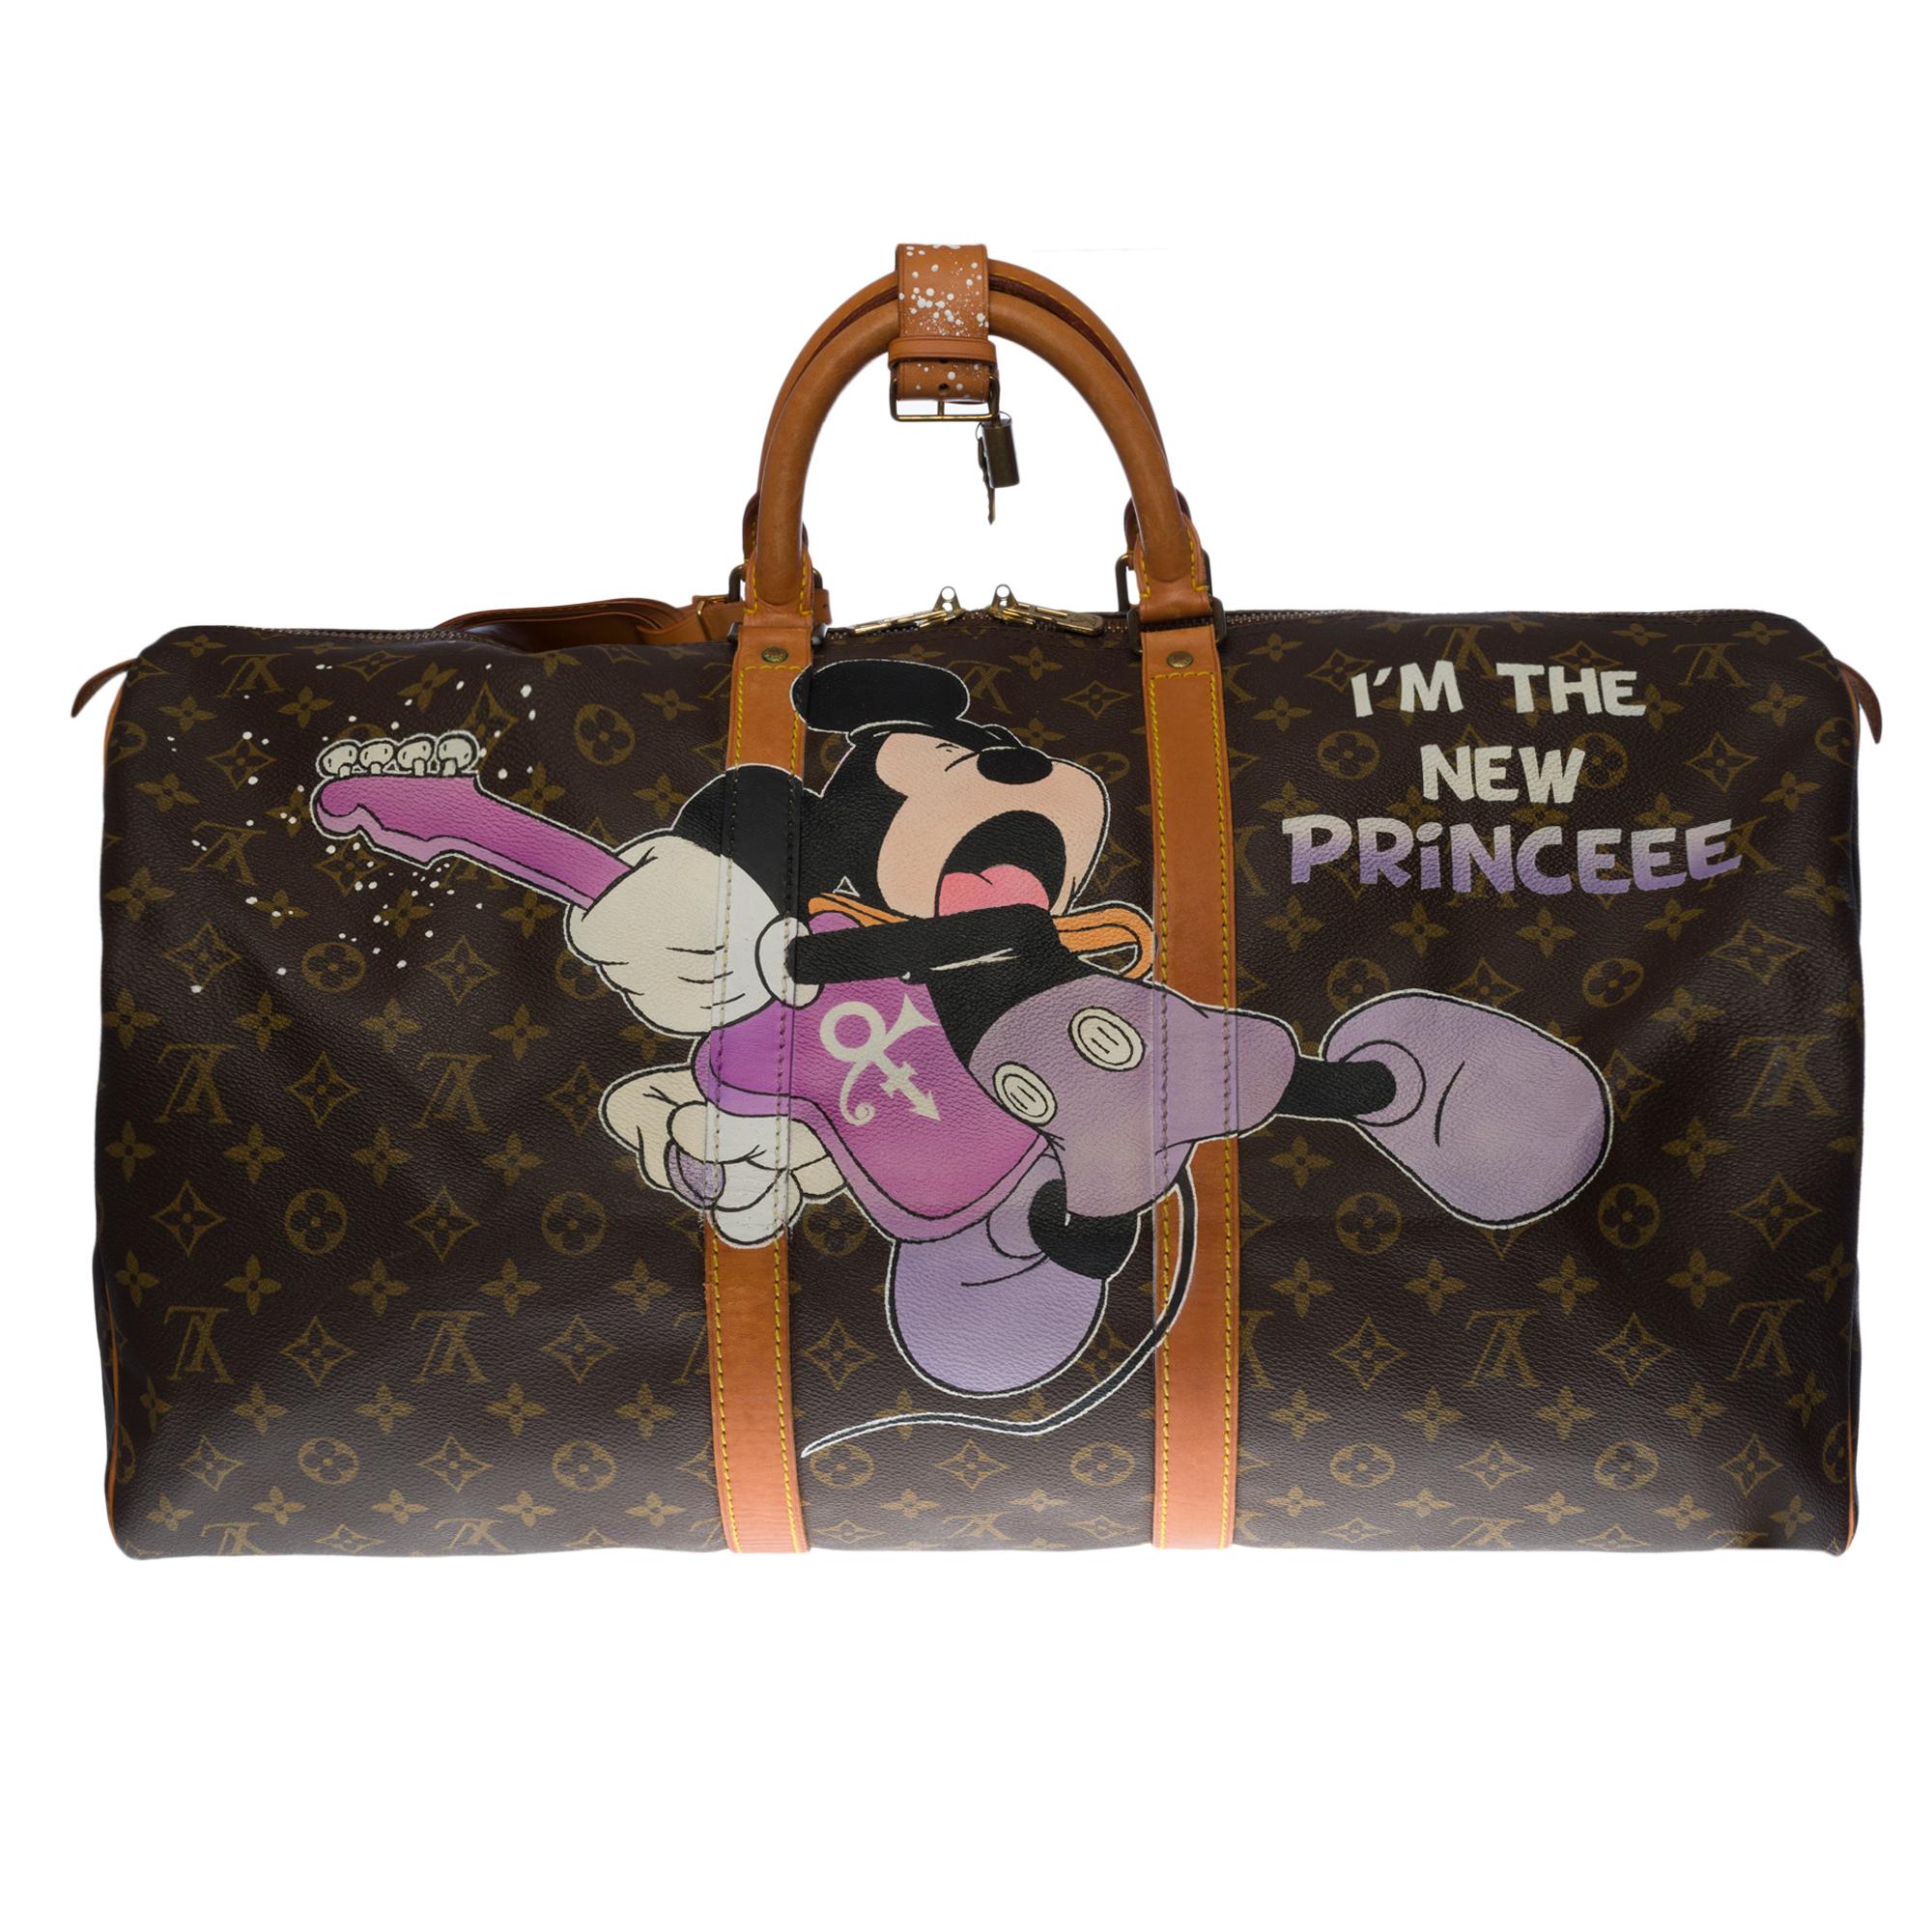 Beautiful Louis Vuitton Keepall travel bag 55 cm in Monogram canvas customized by the fashionable artist of Street Art PatBo in memory of the International Pop Star that was Prince titled 